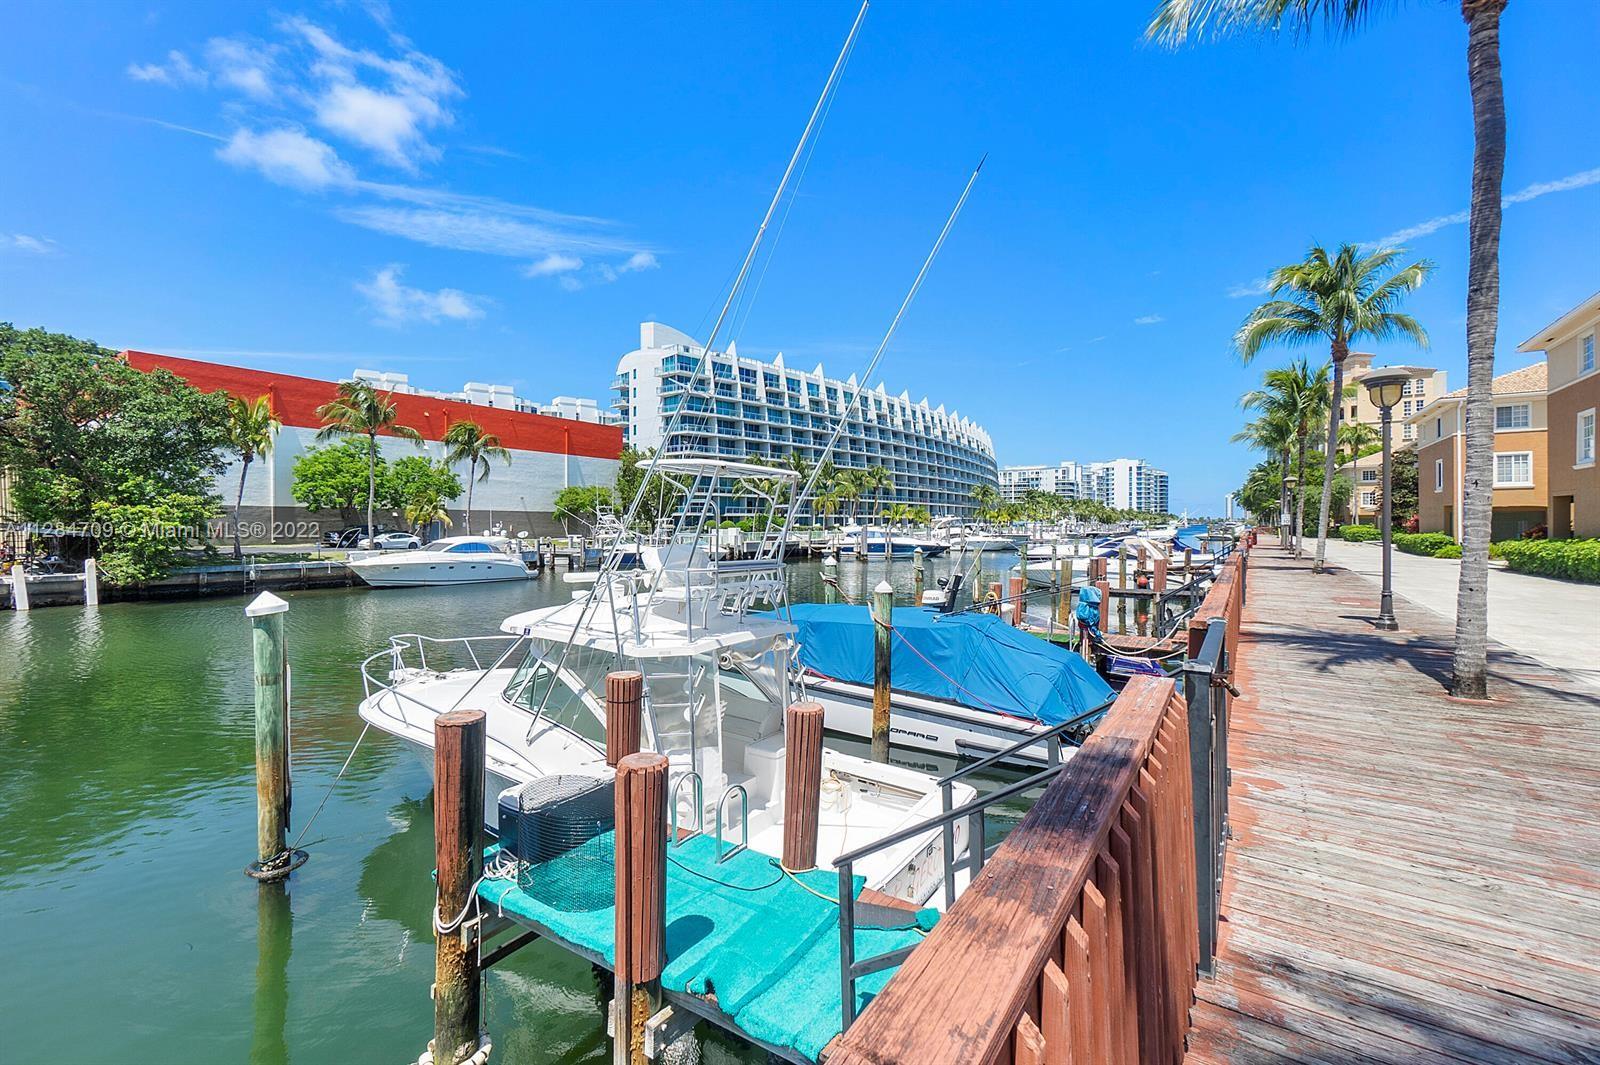 ONE OF A KIND CORNER WATERFRONT THREE STORY TOWNHOUSE 3/2 , NEW CARPET INSIDE,2 CAR GARAGE , GREAT AVENTURA AREA , BEST SCHOOLS, MAKE AN OFFER NOW